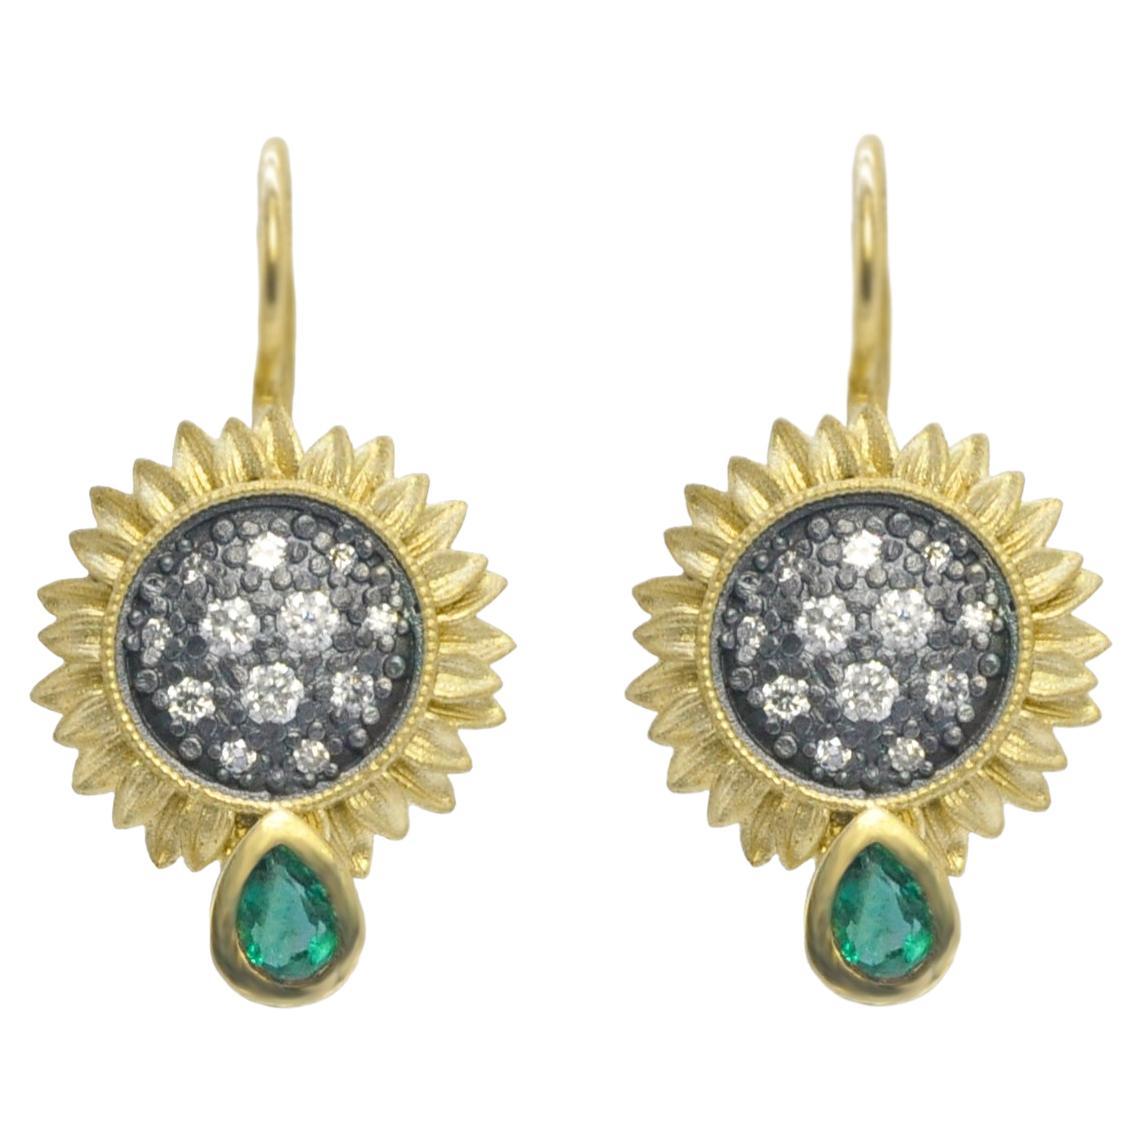 Sunflower Earrings with Pave Set Diamond in Oxidized Silver with Emeralds, Small